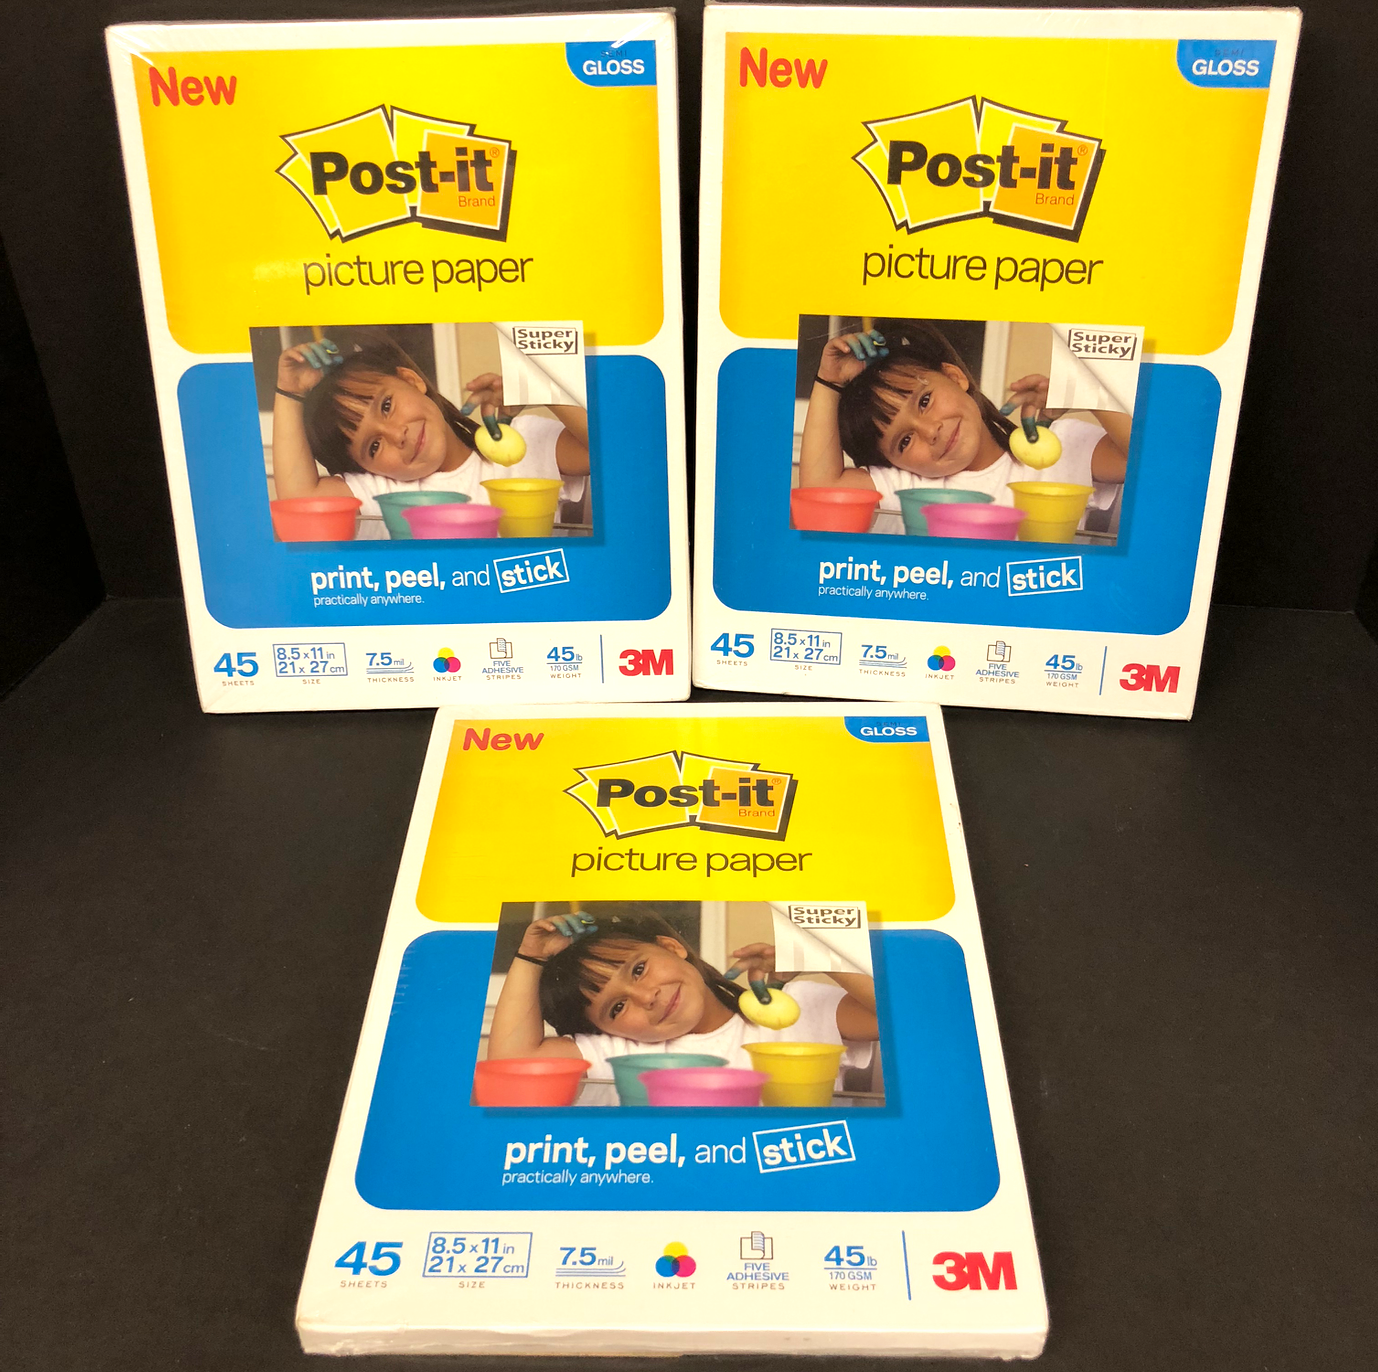 Primary image for New Post-It Picture Paper 8.5 X 11 7.5 mil  Inkjet 3M NEW - 135 Sheets Glossy